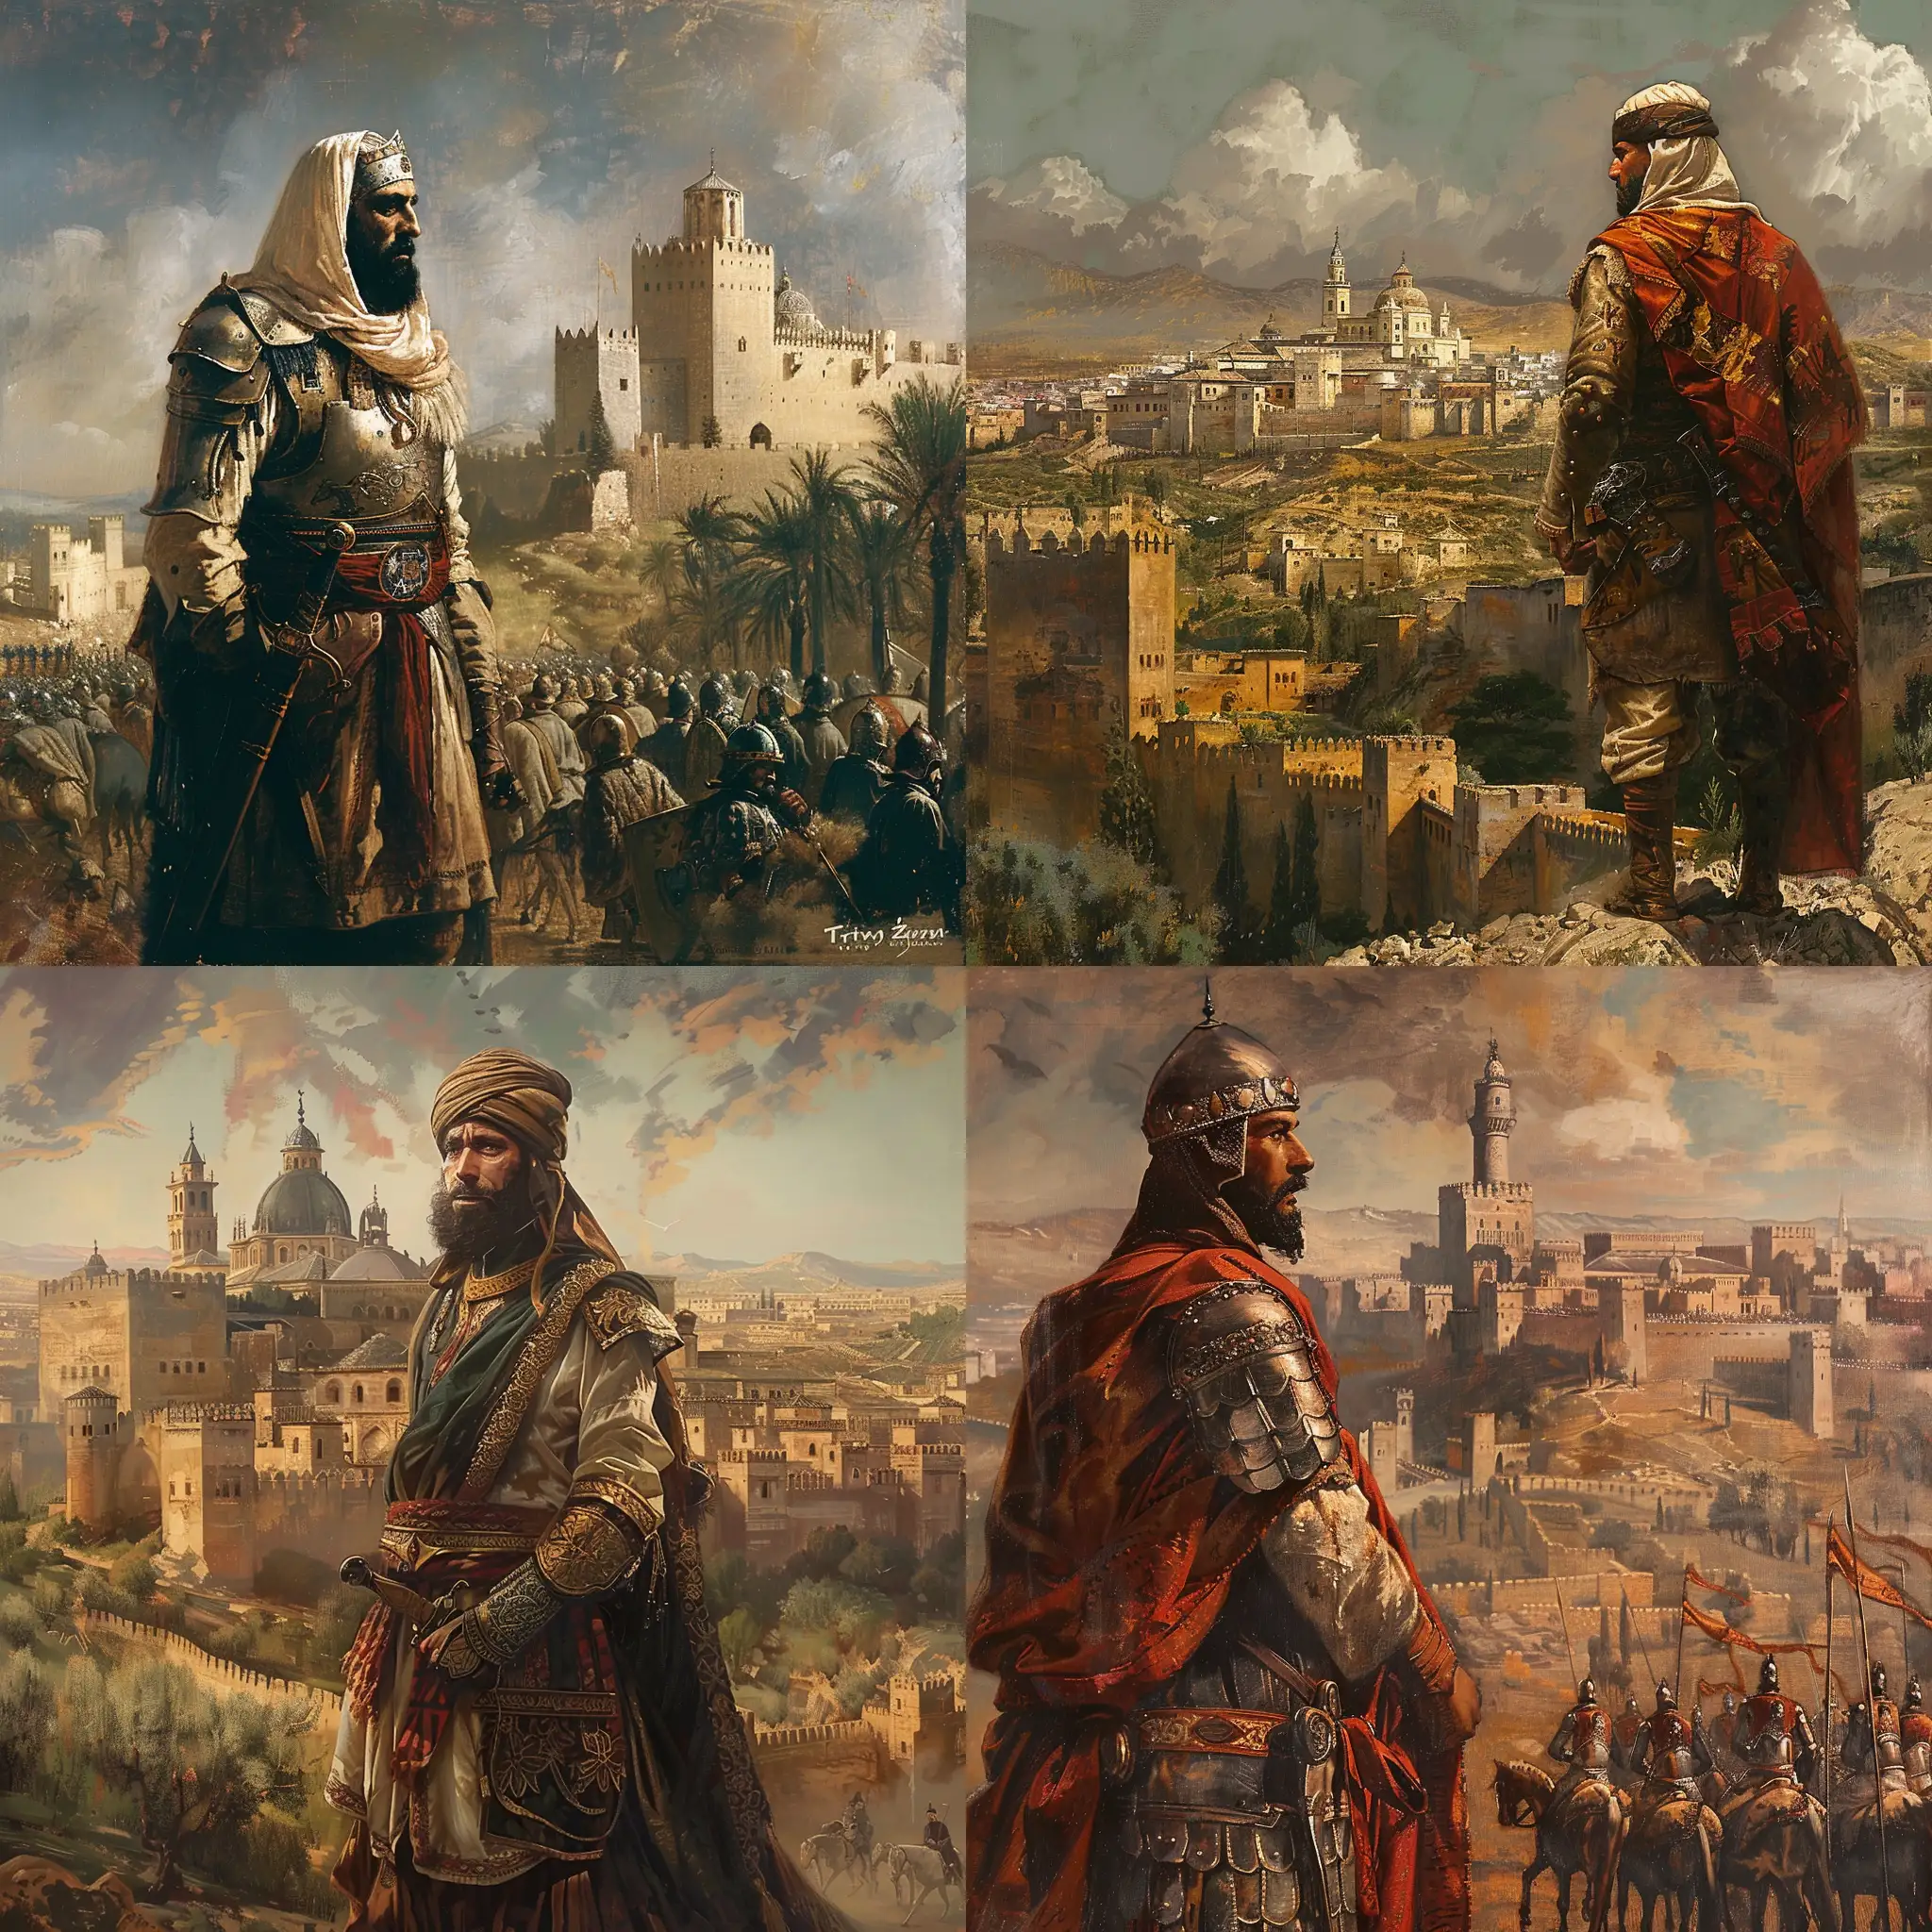 Tariq Ibn Ziyad, the conqueror of Spain, standing in front of Andalusia, artistic style